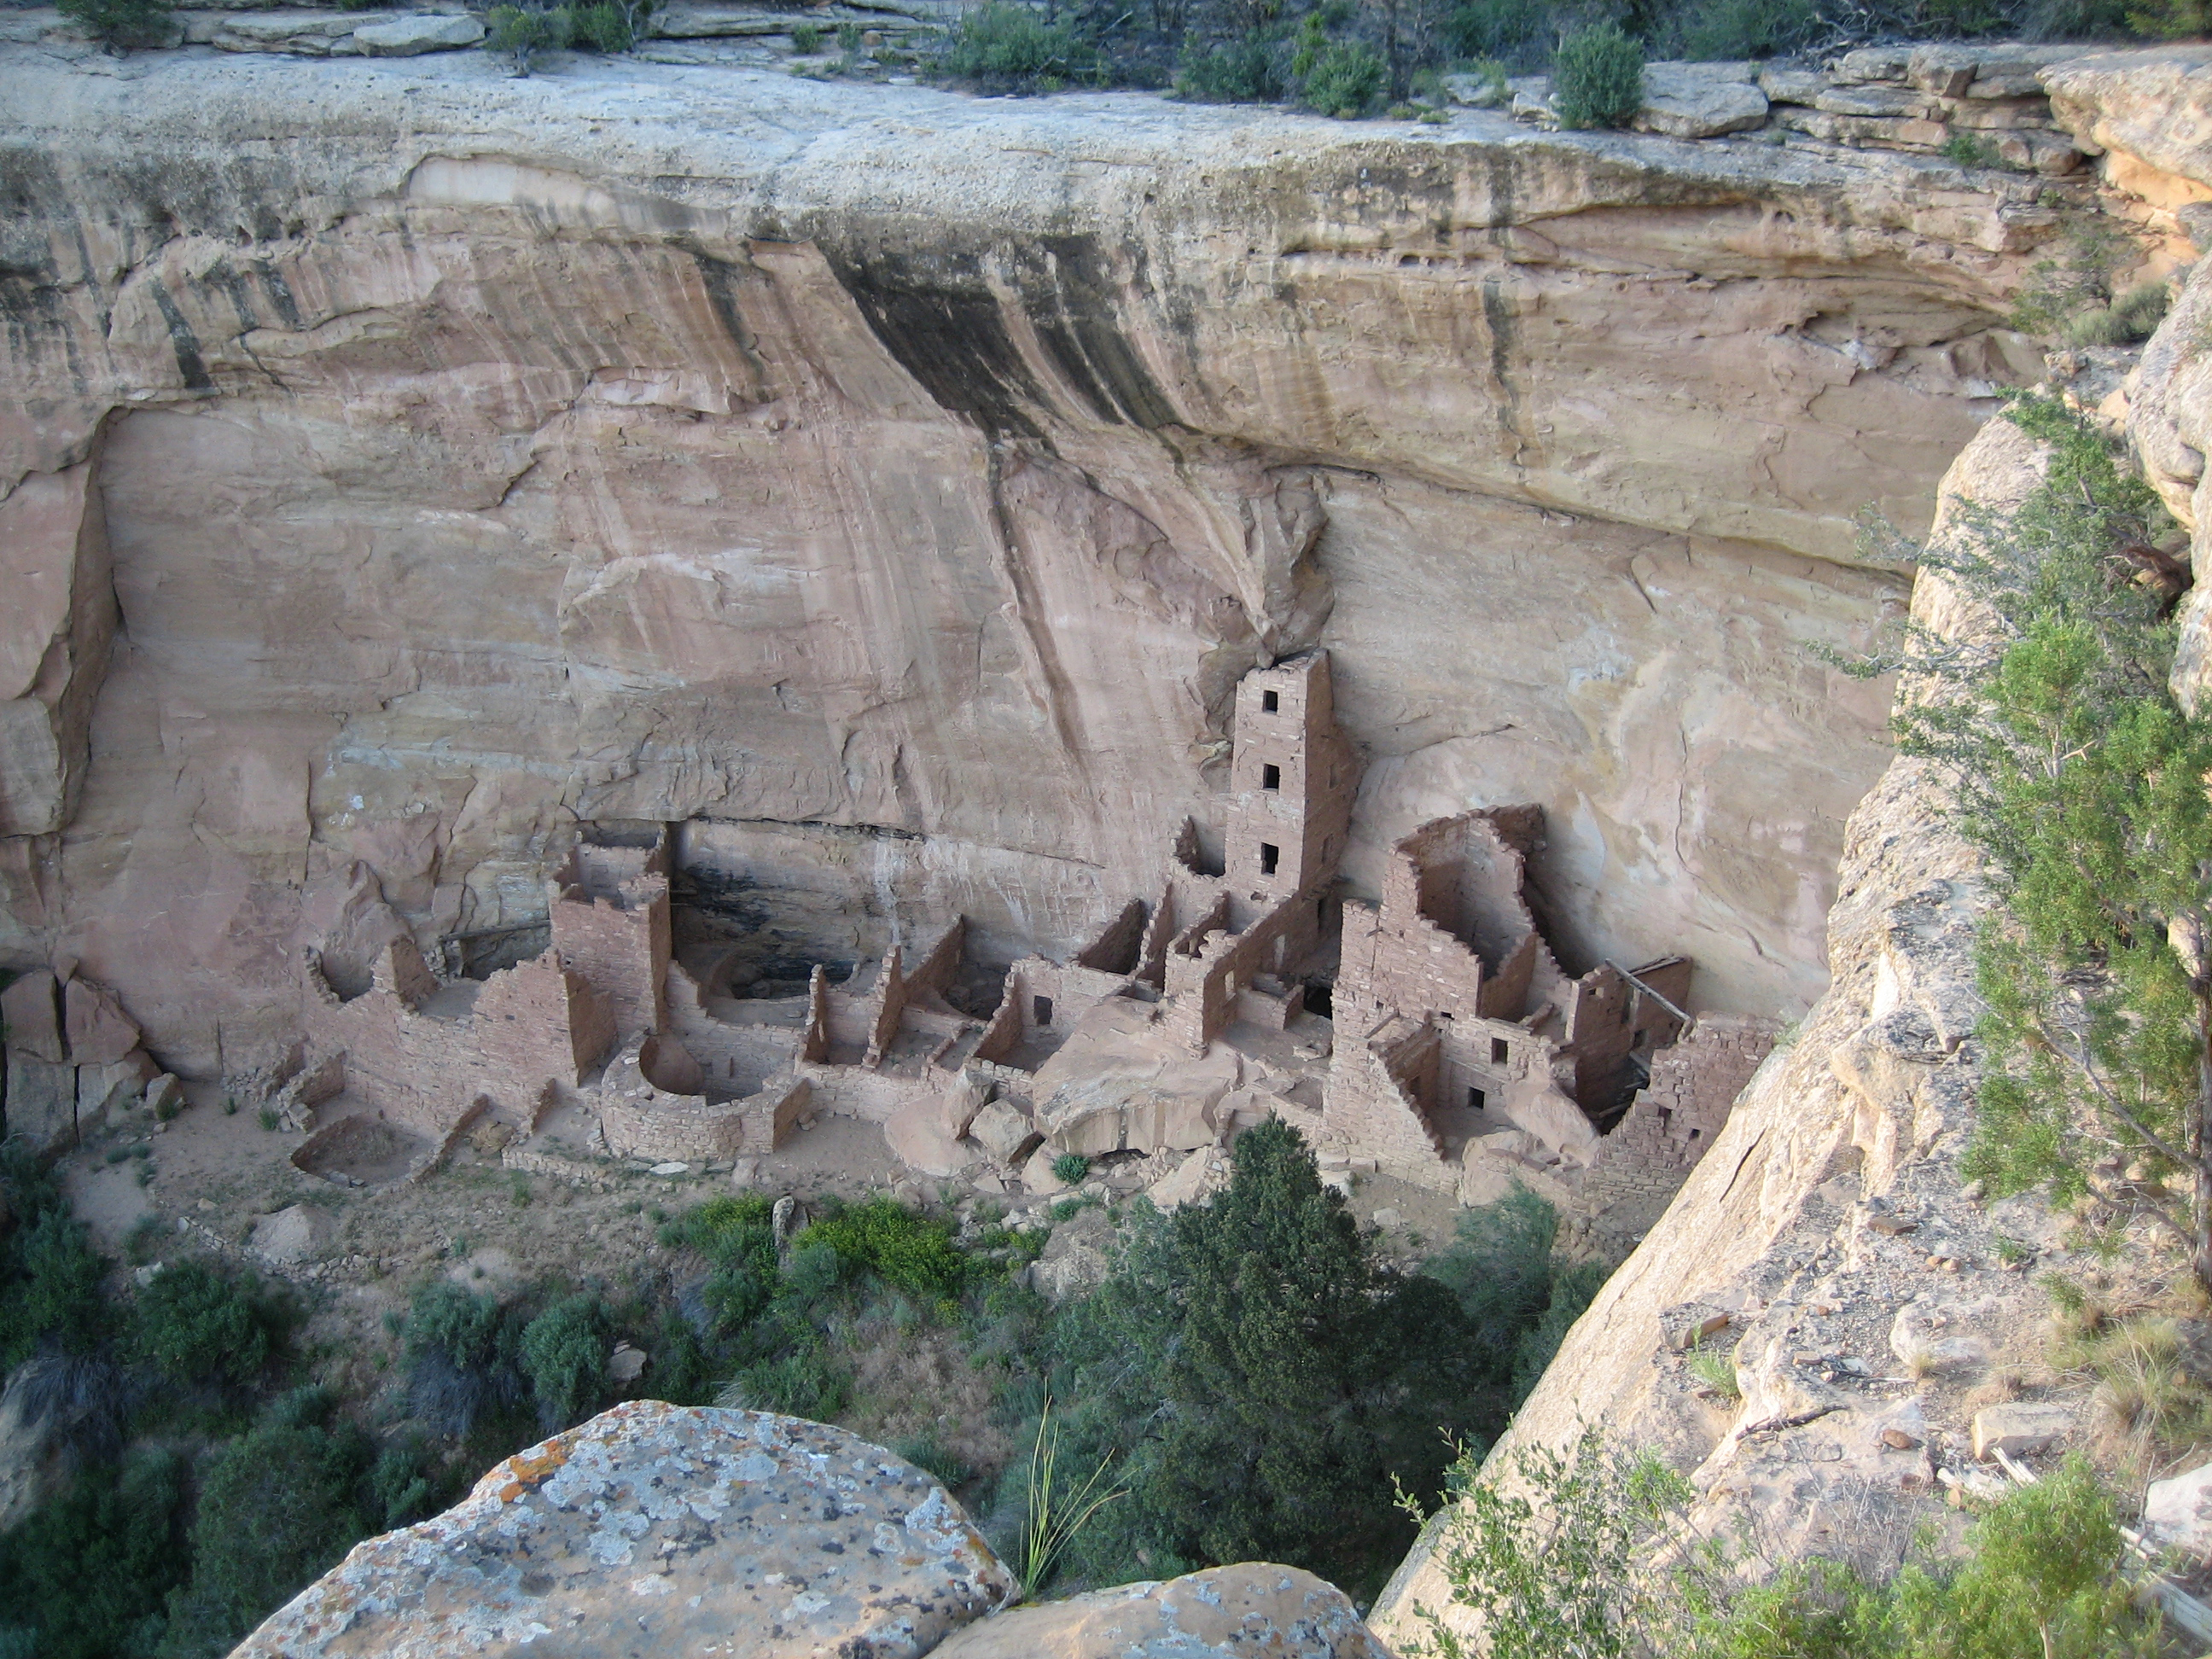 View of cliff dwelling from above a canyon